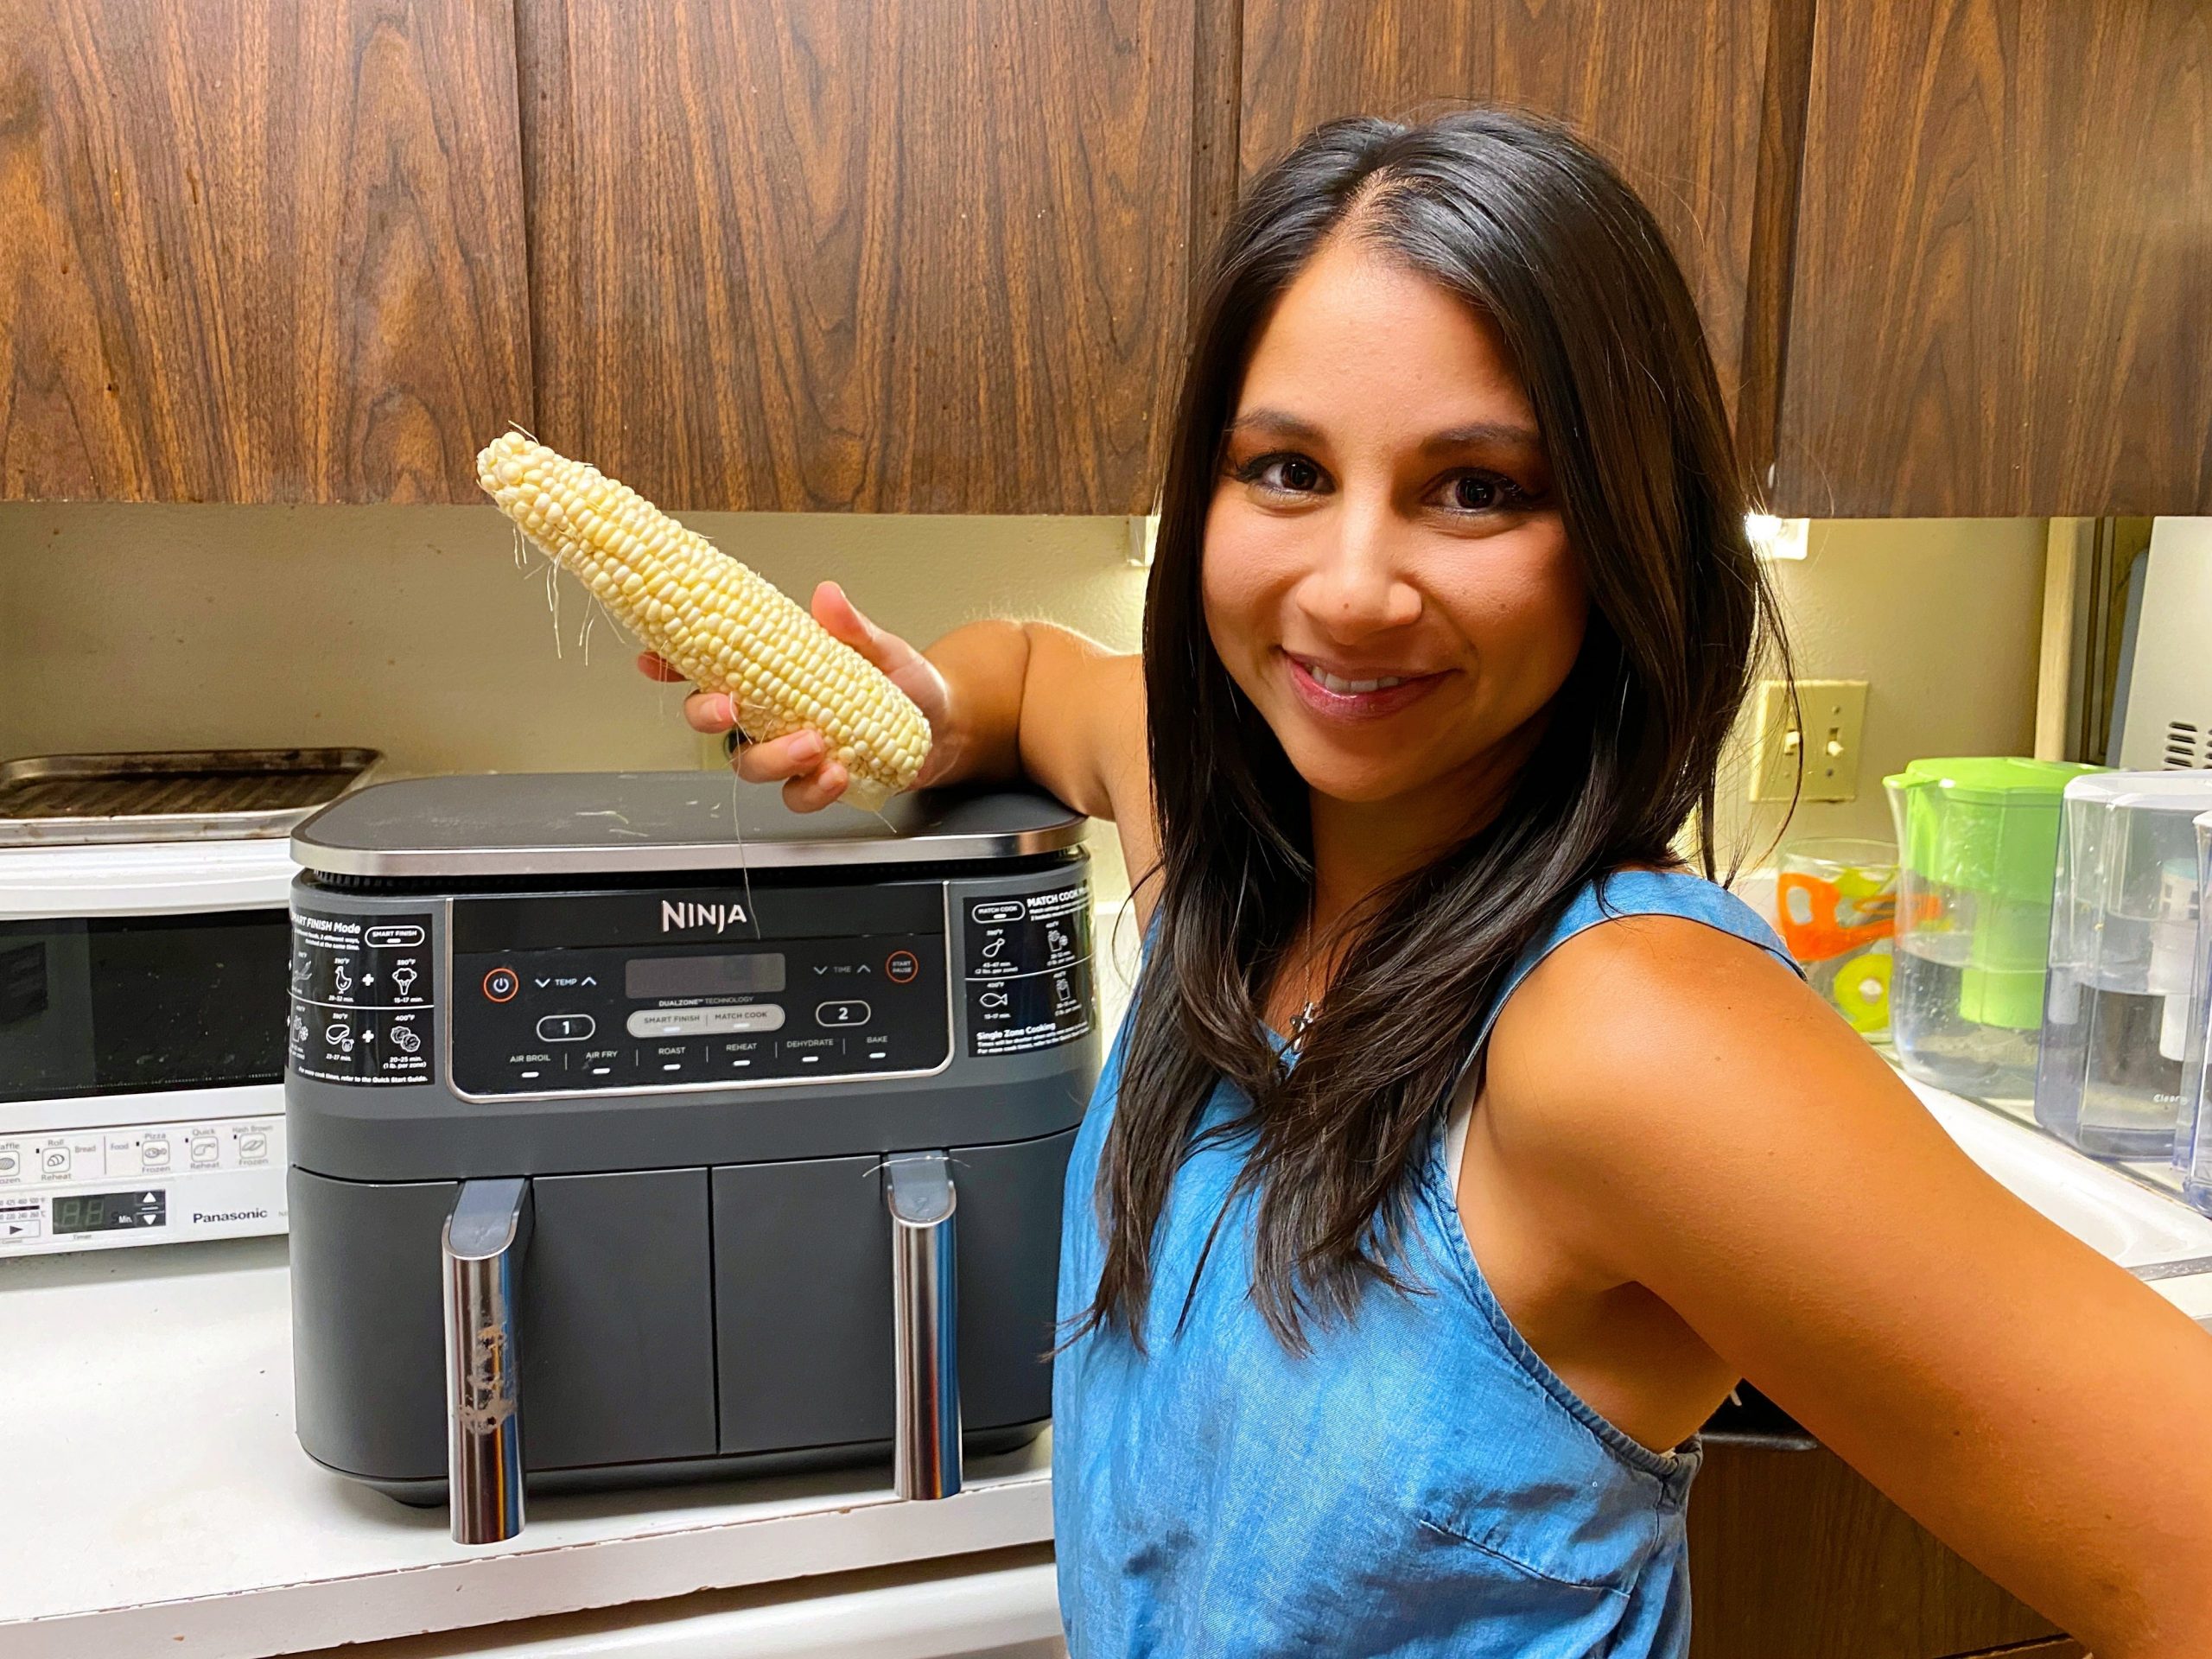 Chelsea holding up a corn on a cob in front of an air fryer.